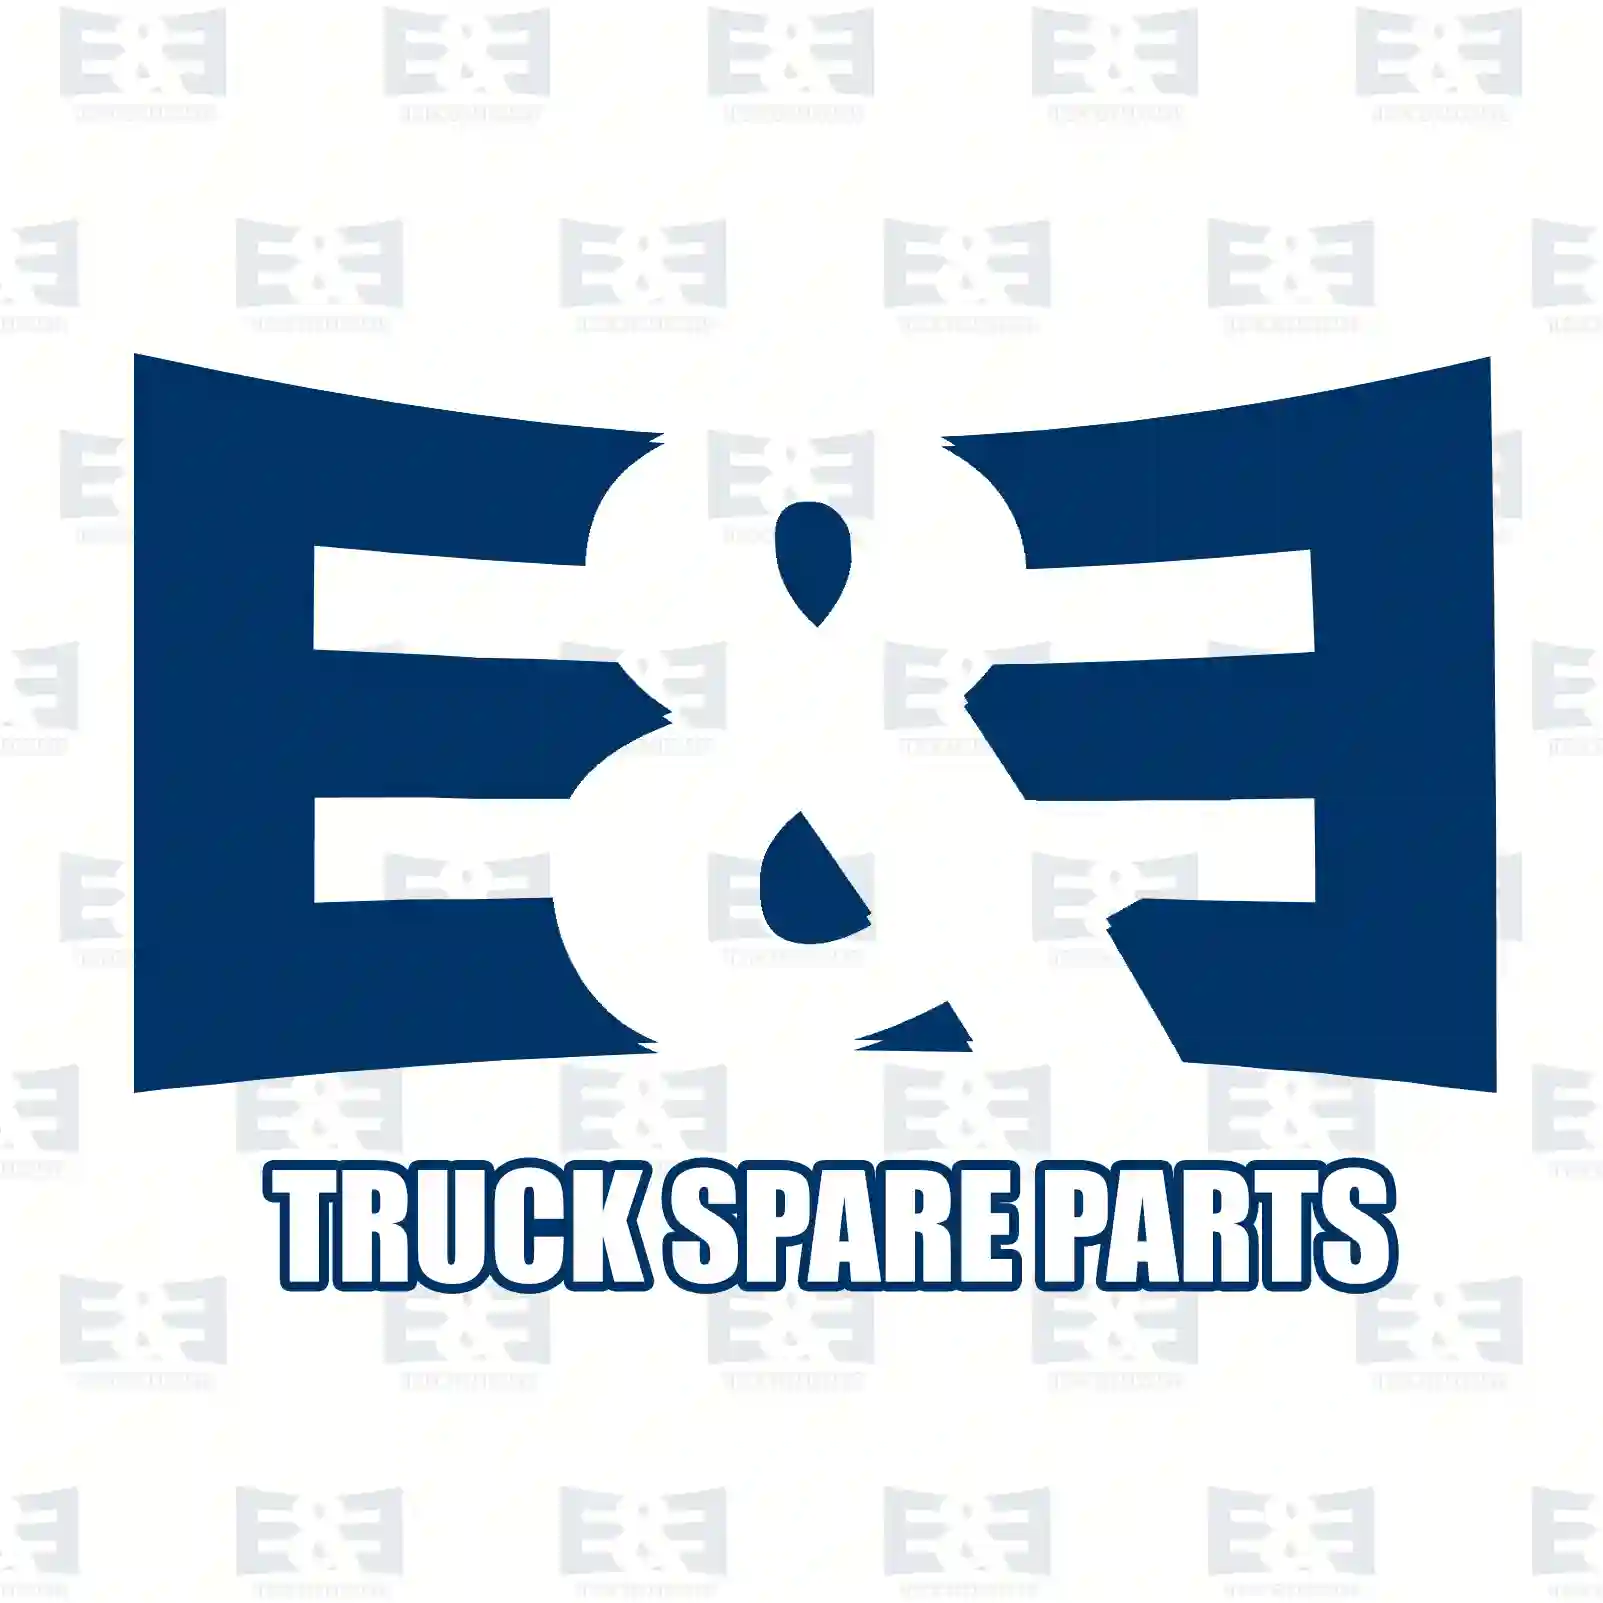 General overhaul kit, complete with race rings, 2E2208525, 4220100608 ||  2E2208525 E&E Truck Spare Parts | Truck Spare Parts, Auotomotive Spare Parts General overhaul kit, complete with race rings, 2E2208525, 4220100608 ||  2E2208525 E&E Truck Spare Parts | Truck Spare Parts, Auotomotive Spare Parts